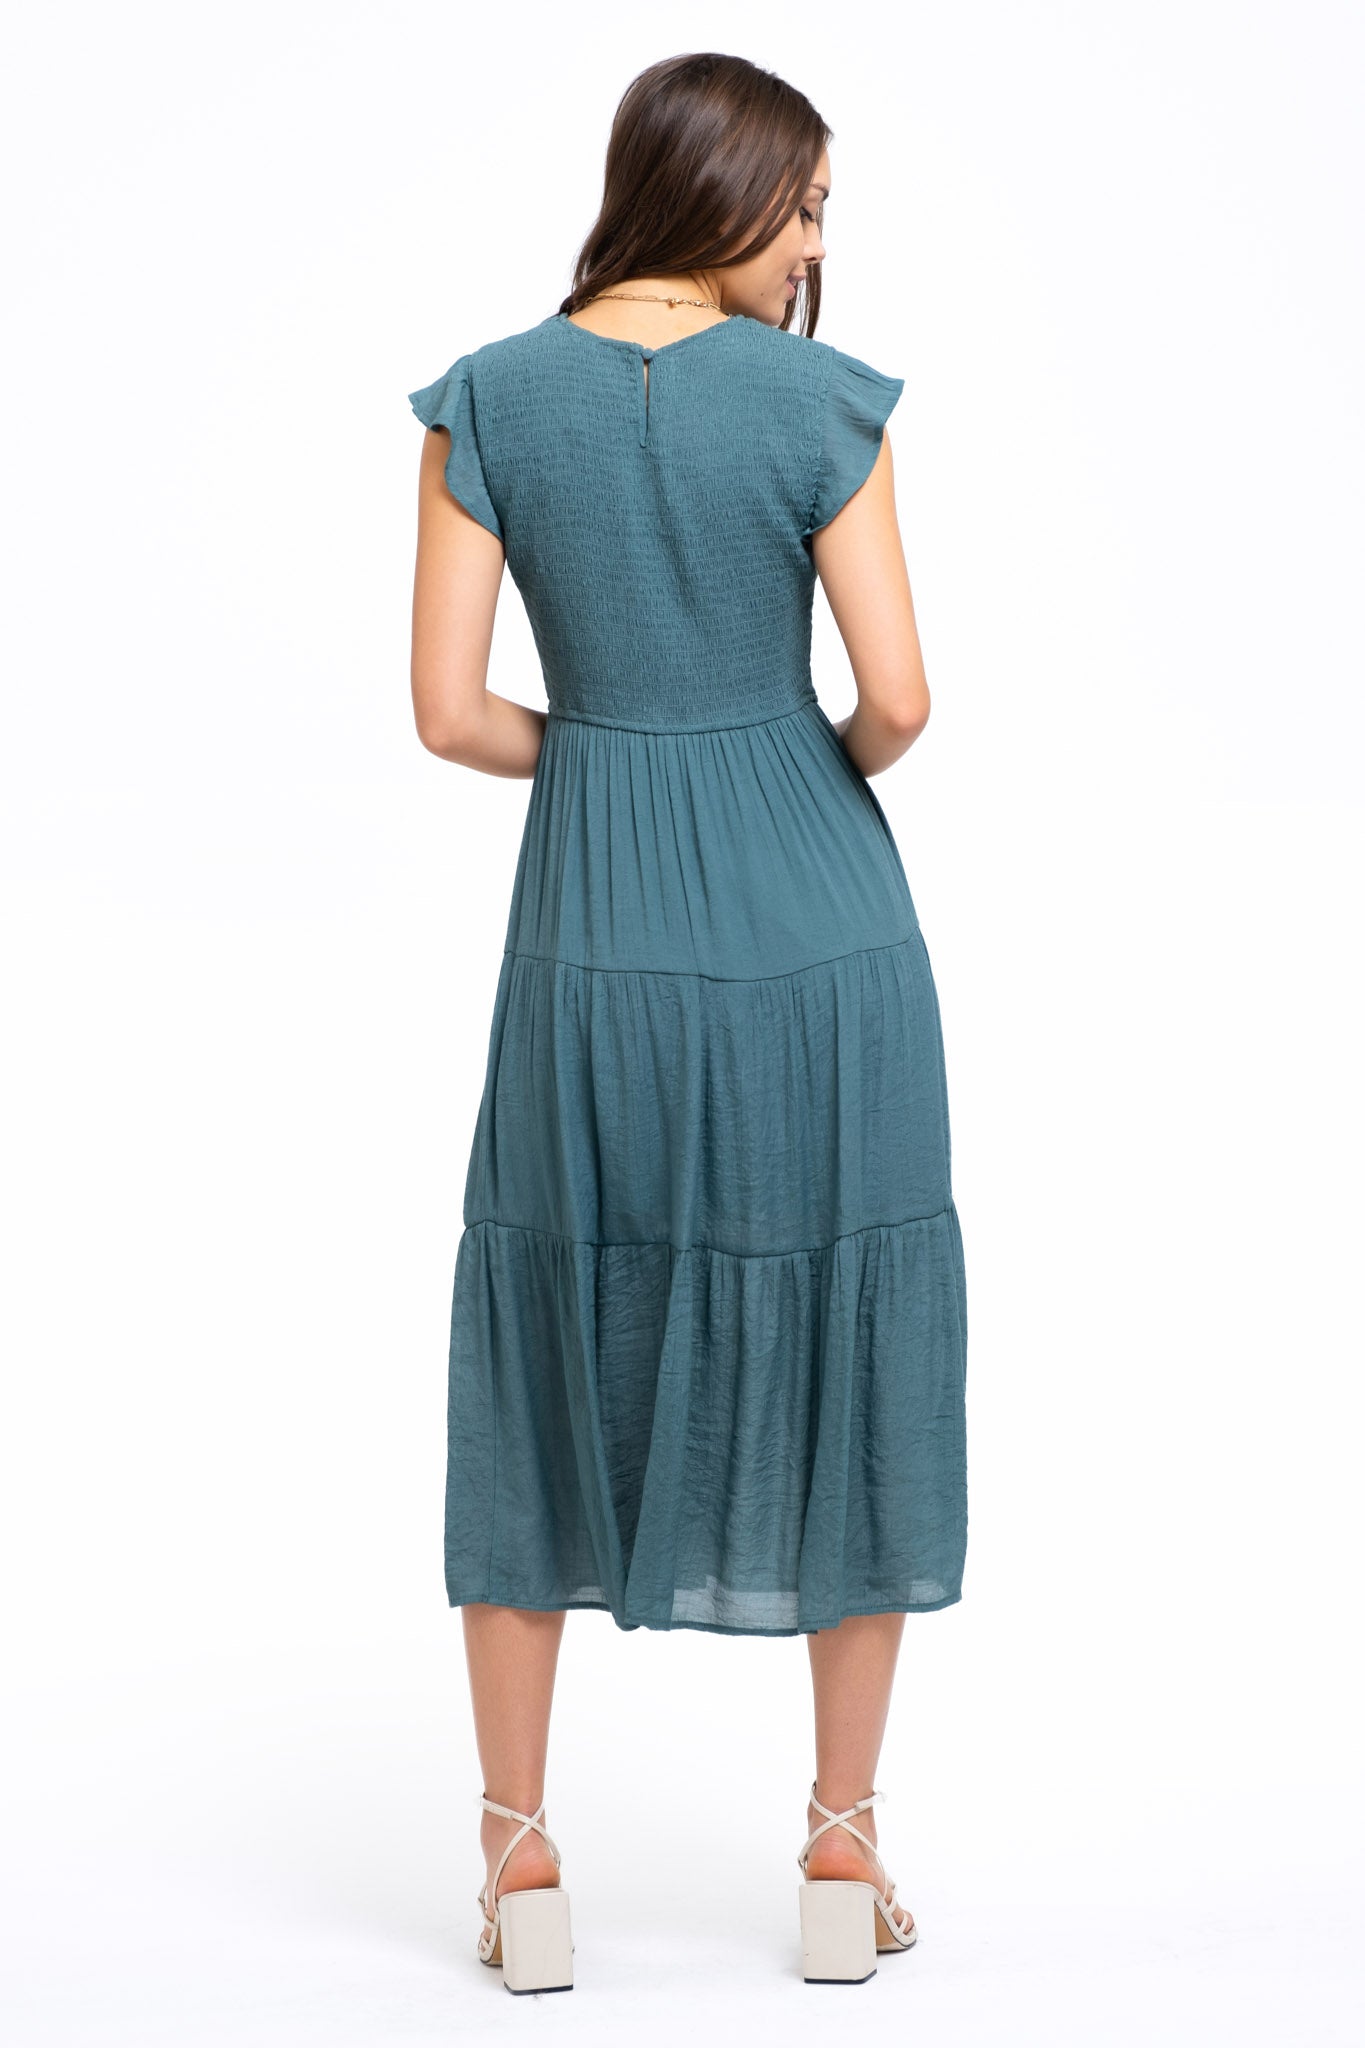 Pre-Loved, Lynette Smocked Midi Dress, Teal (new with tags)